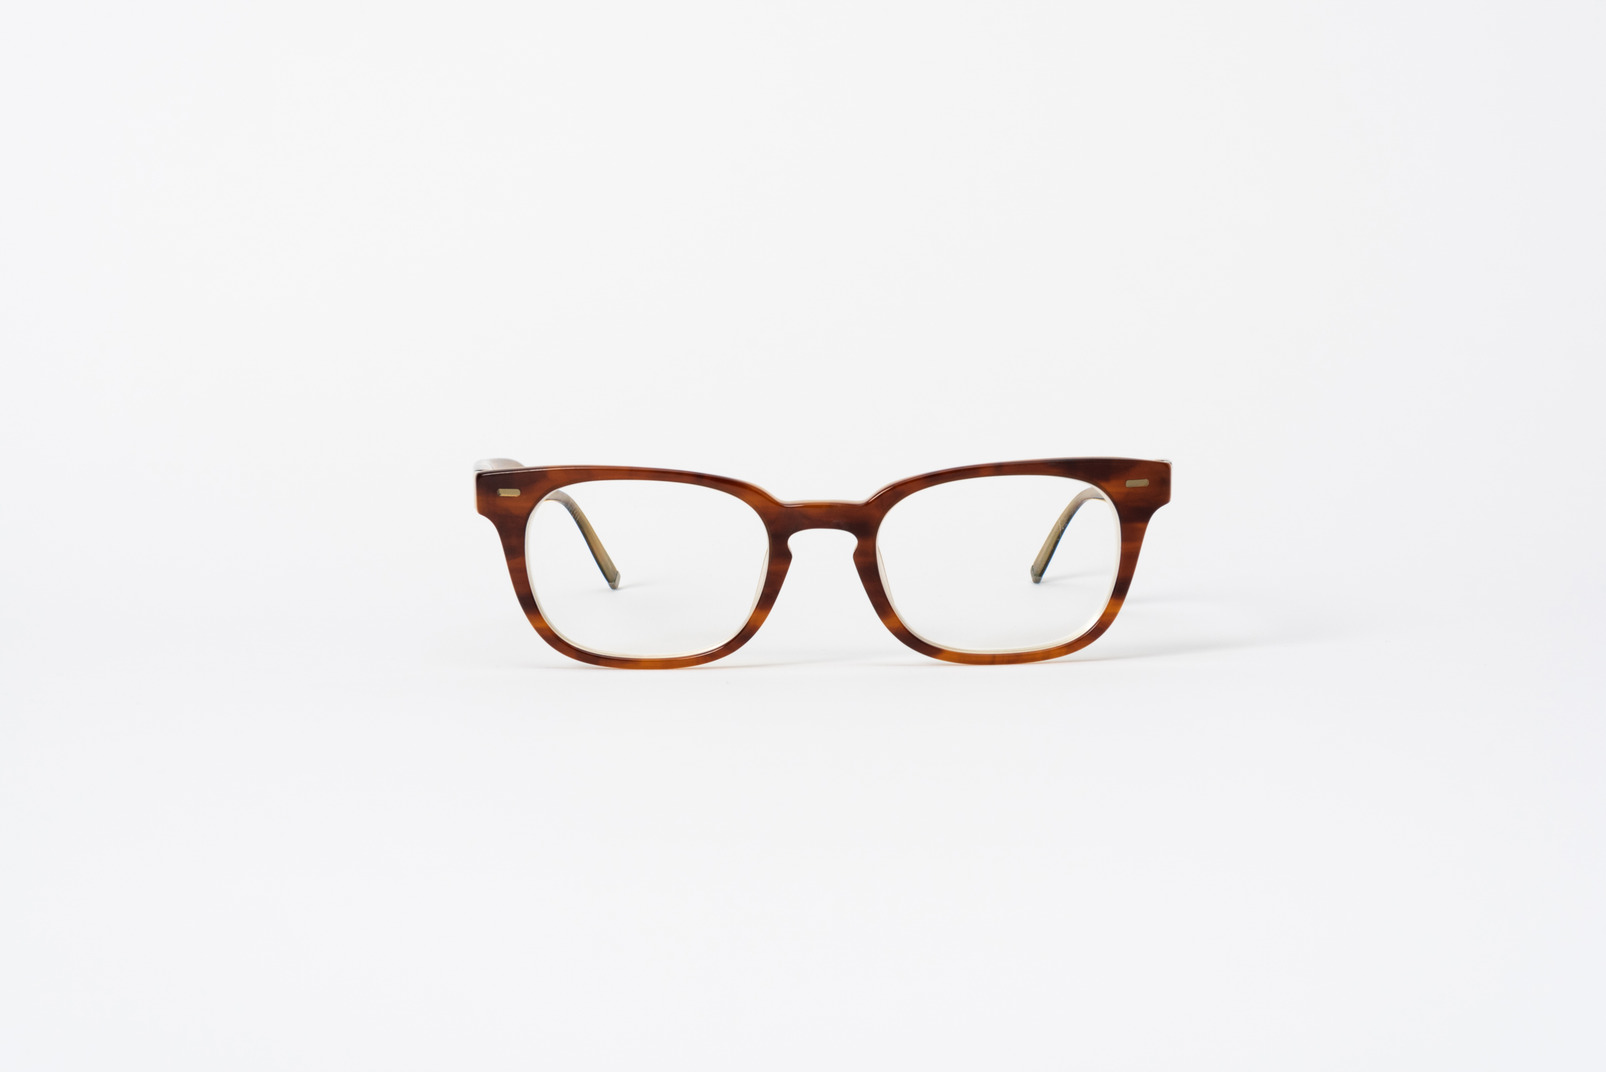 Eyeglasses that will make you look even more attractive!